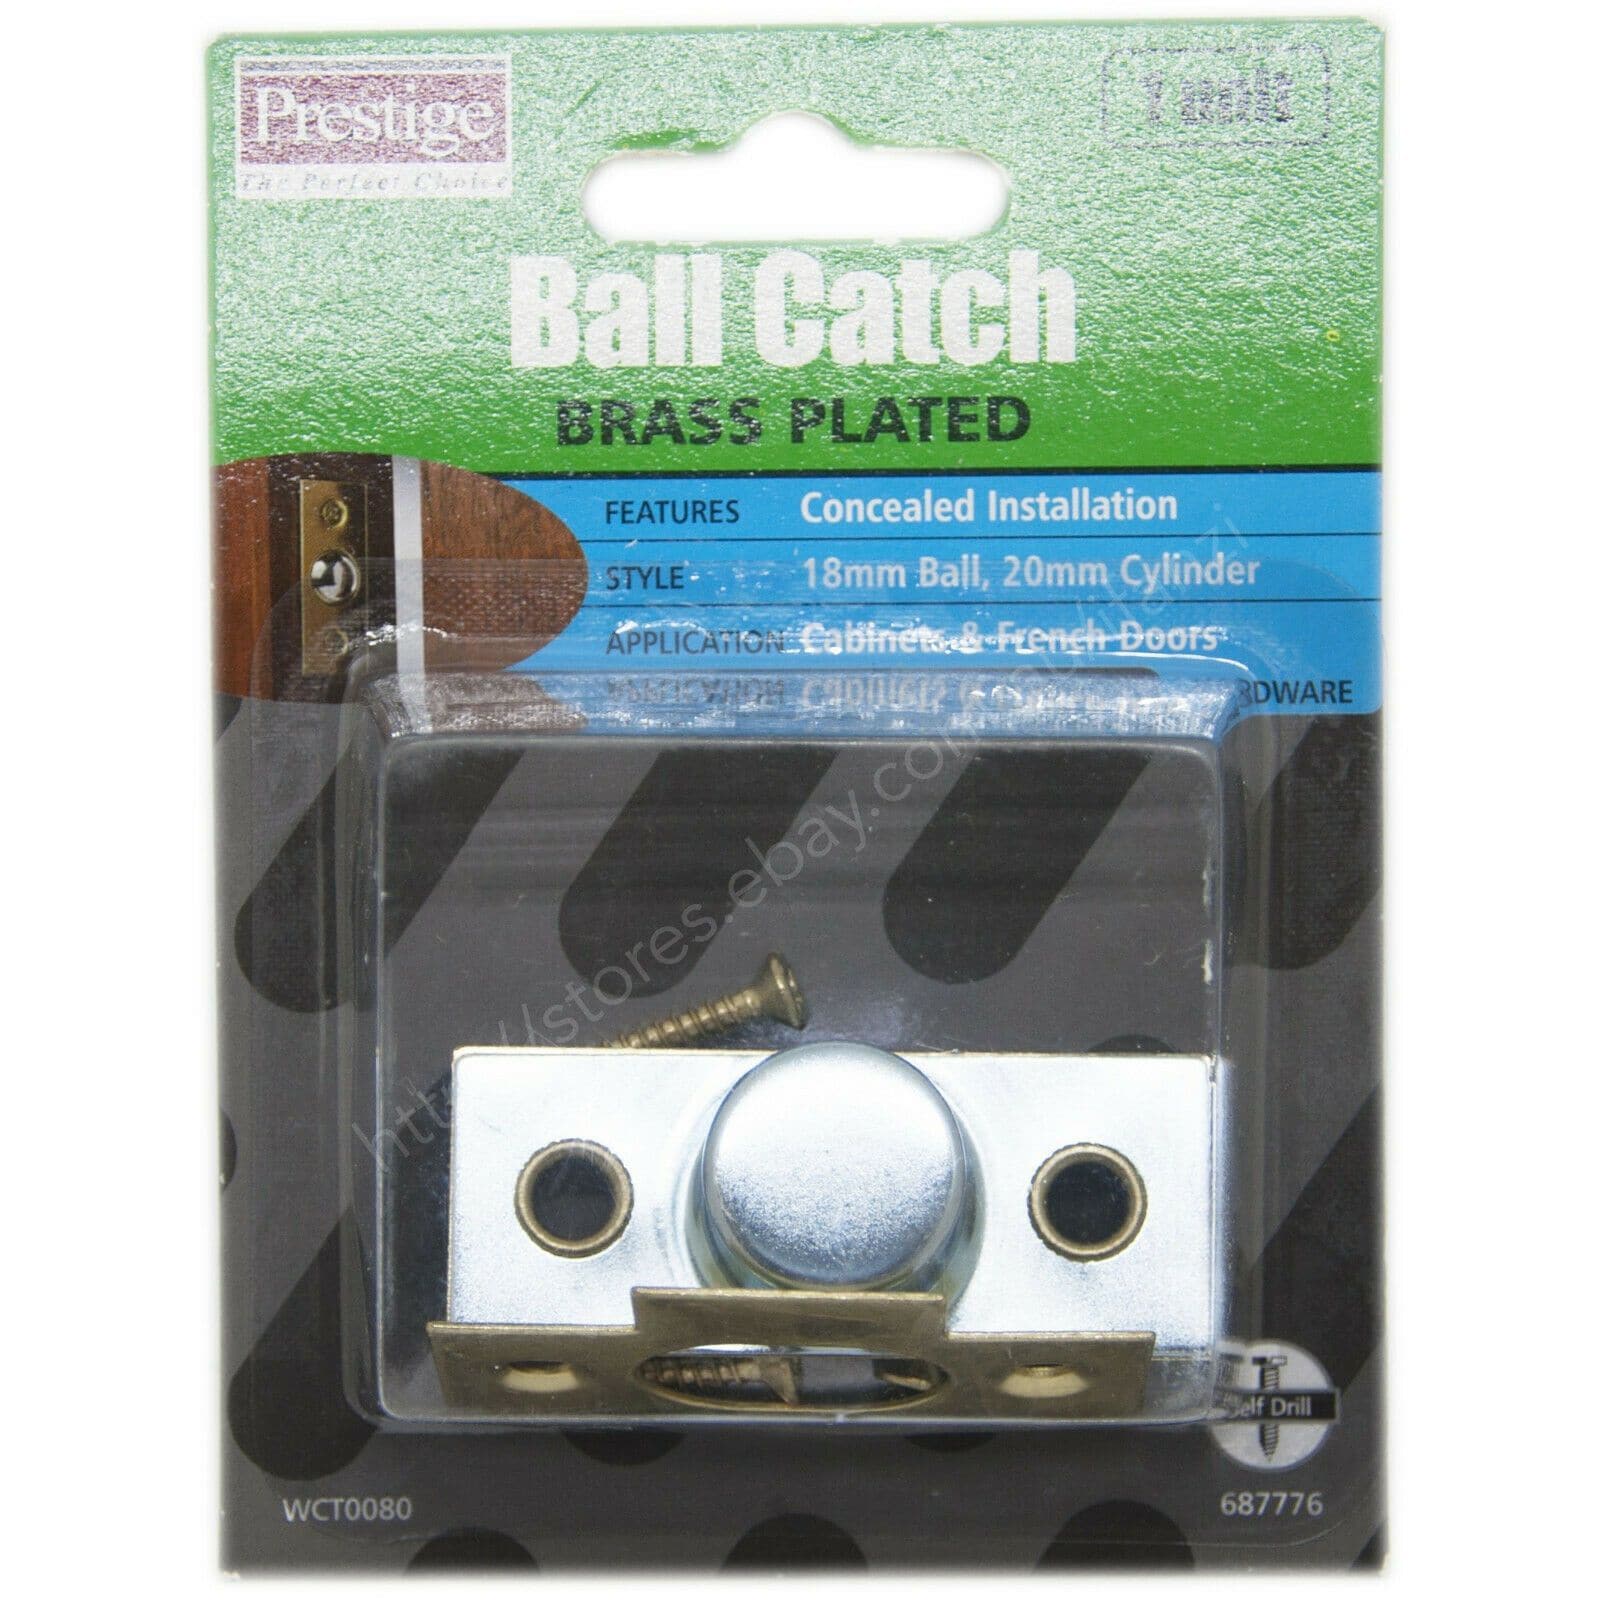 Prestige Ball Catch Brass Plated 18mm Ball, 20mm Cylinder WCT0080 - Double Bay Hardware